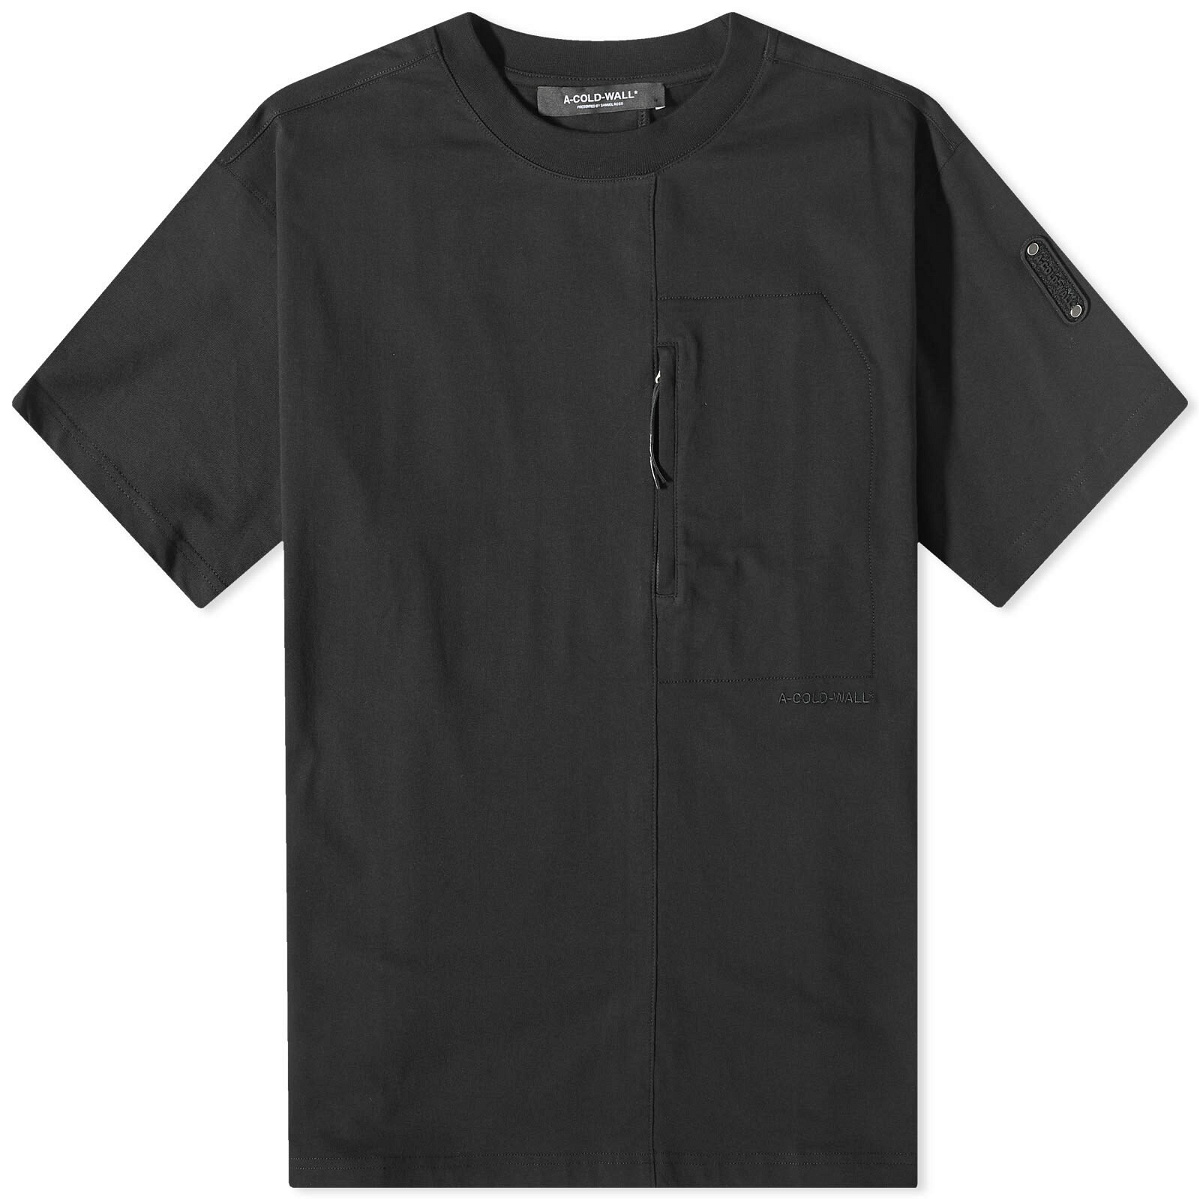 A-COLD-WALL* Men's Brutalist T-Shirt in Black A-Cold-Wall*